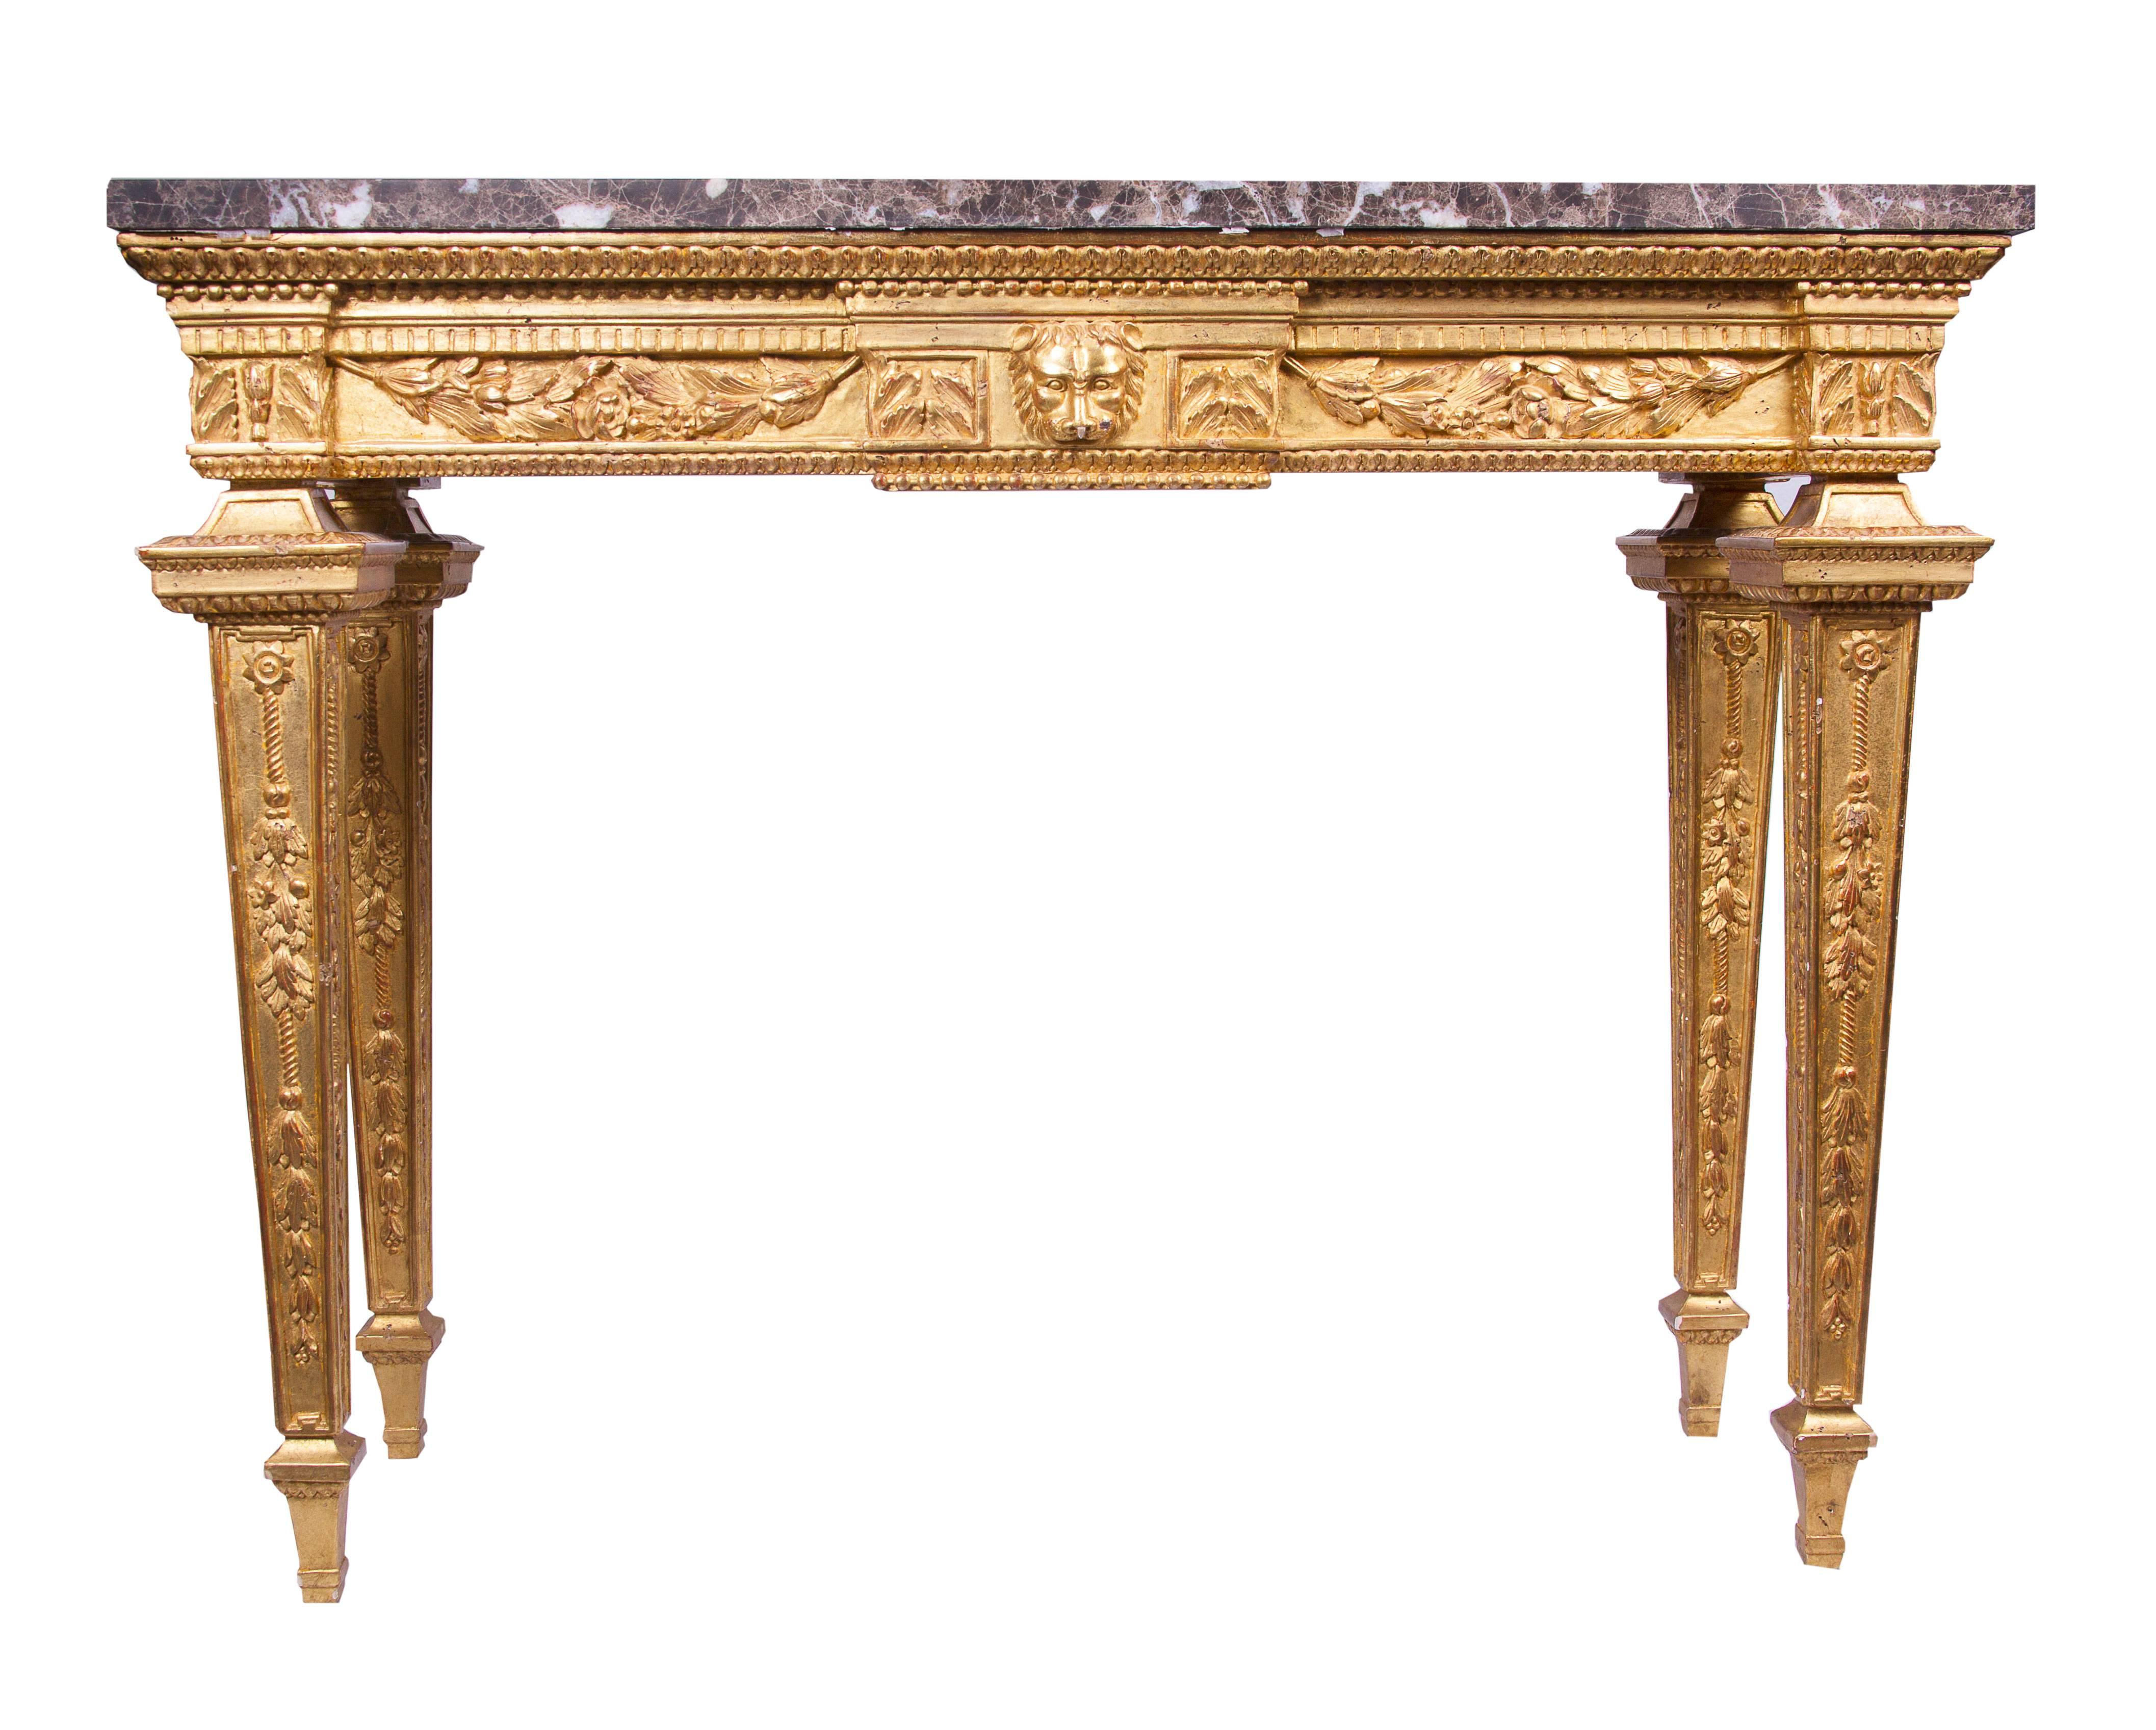 This stately pair of gilt consoles will make a statement of absolute sophistication. They are hand-carved in relief form followed by a gesso and fine gilt application. They are Louis XVI style showing a central lion mask flanked by swags. The top